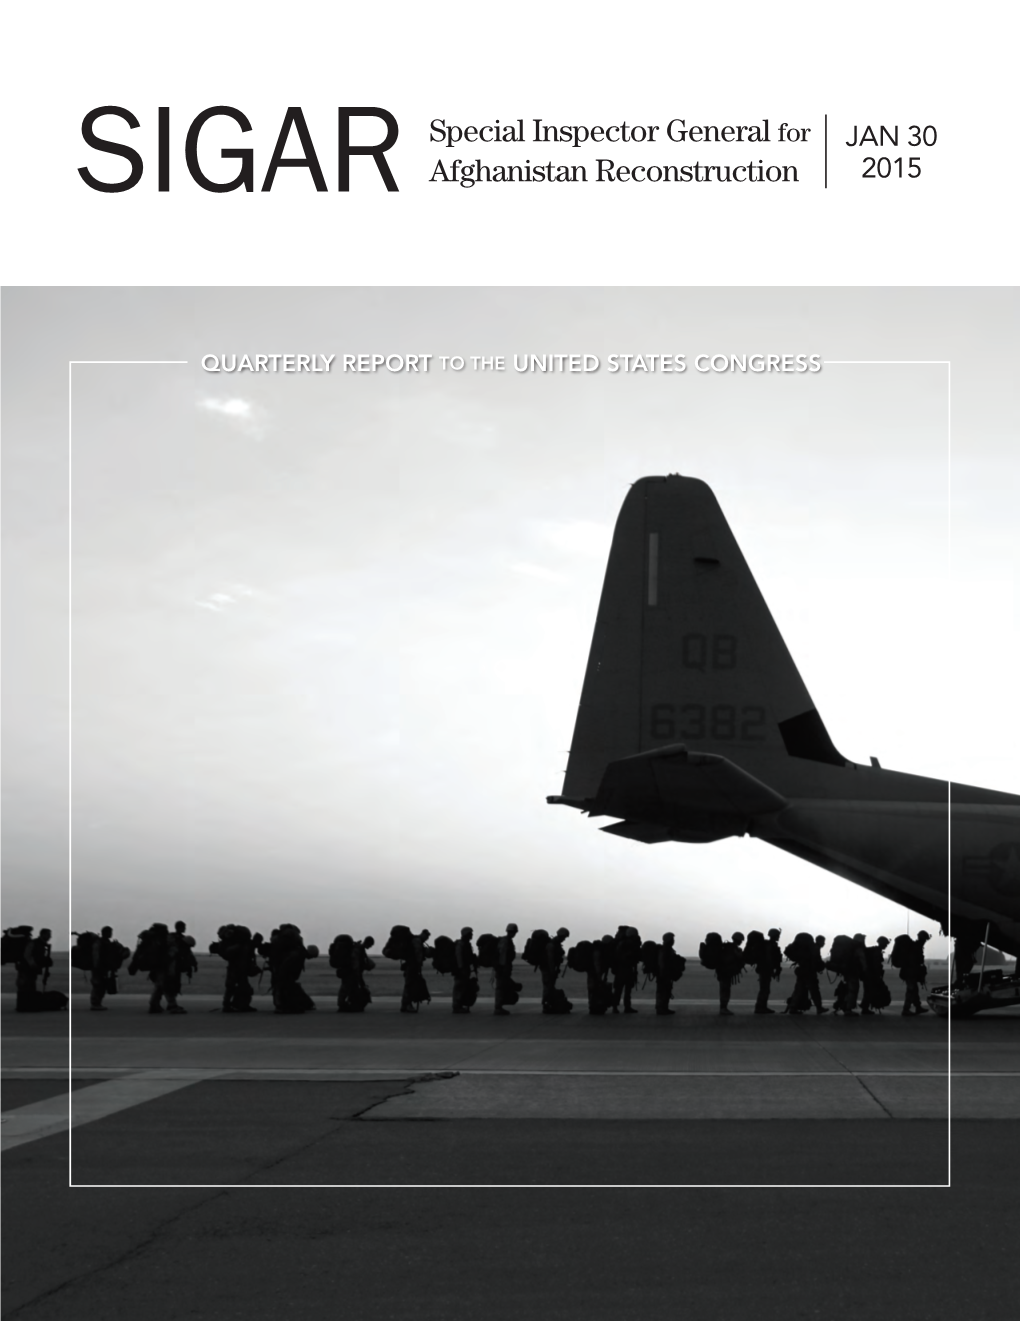 Quarterly Report of the Special Inspector General for Afghanistan